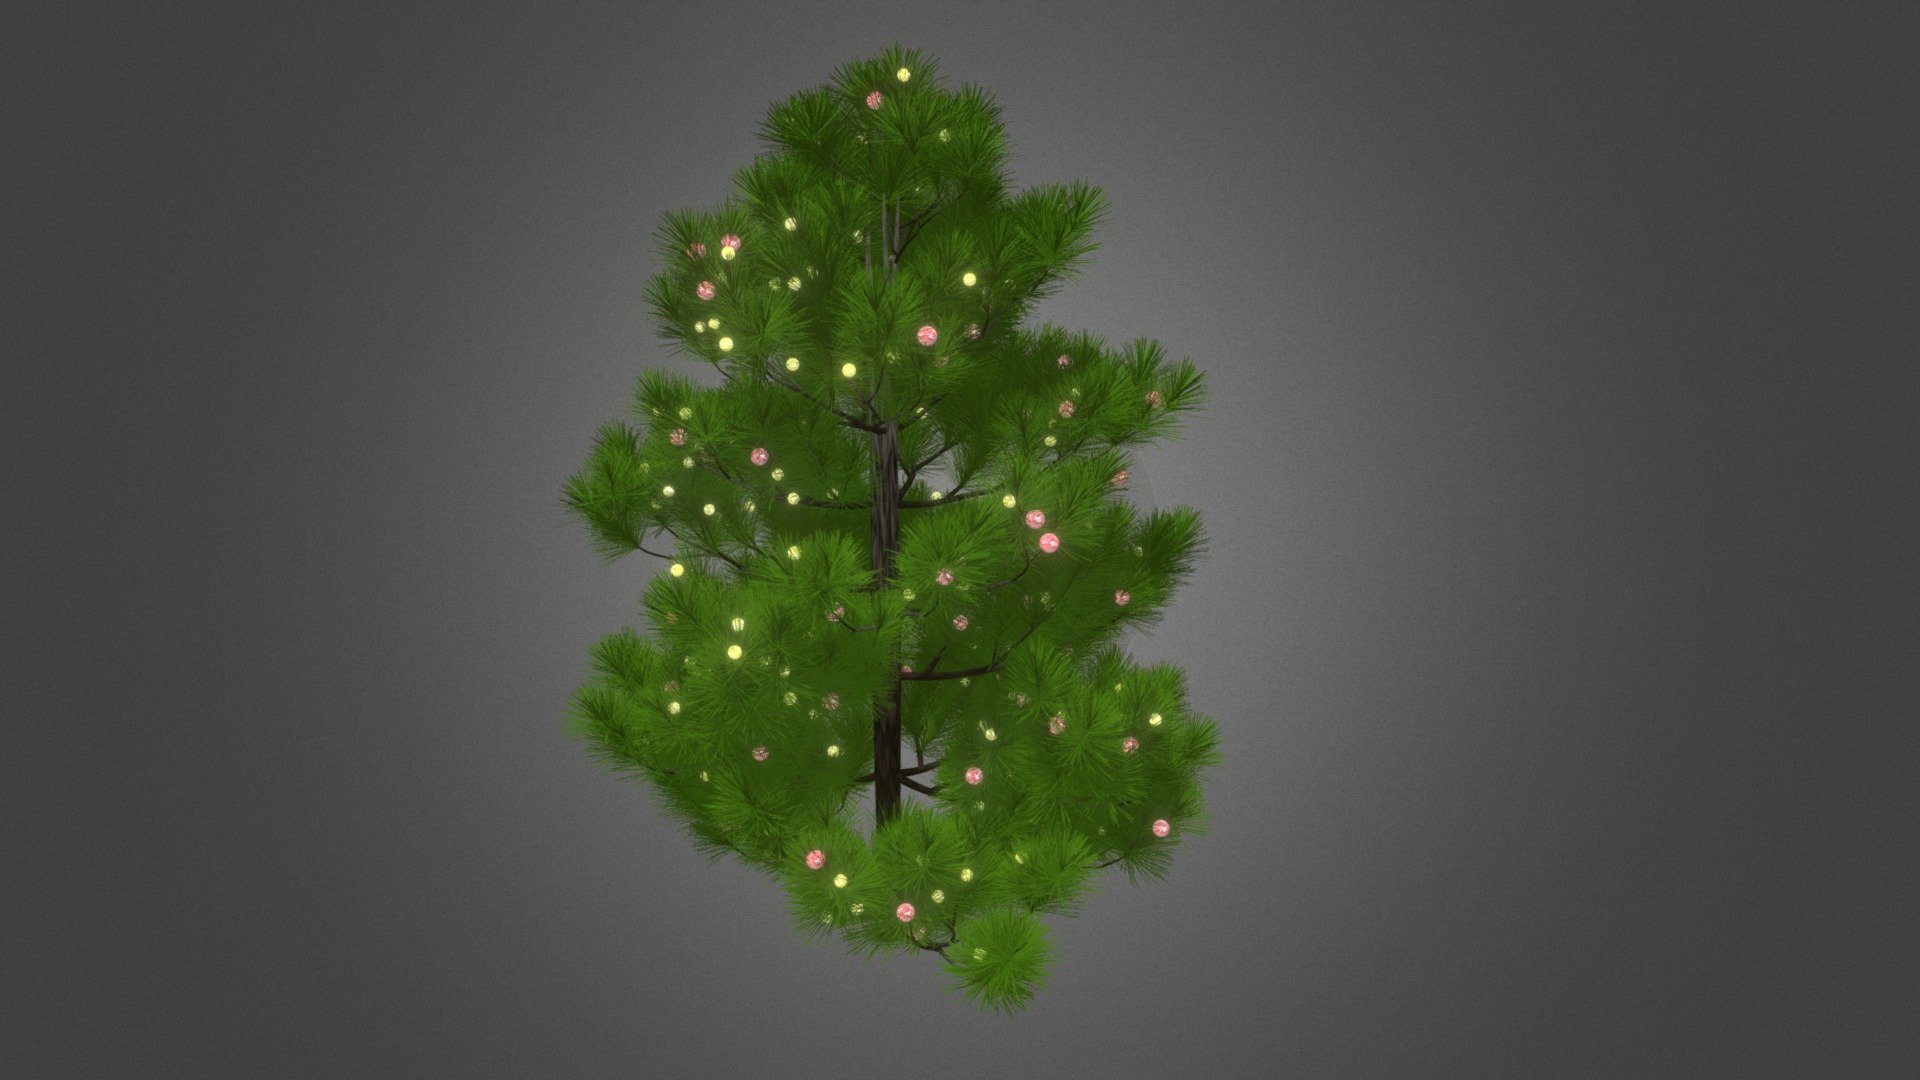 Christmas Tree
Modeled and textured by Blender
Please follow and support us 


SketchfabWeeklyChallenge

3December2022Challenge - Christmas Tree - Buy Royalty Free 3D model by greenlive 3d model